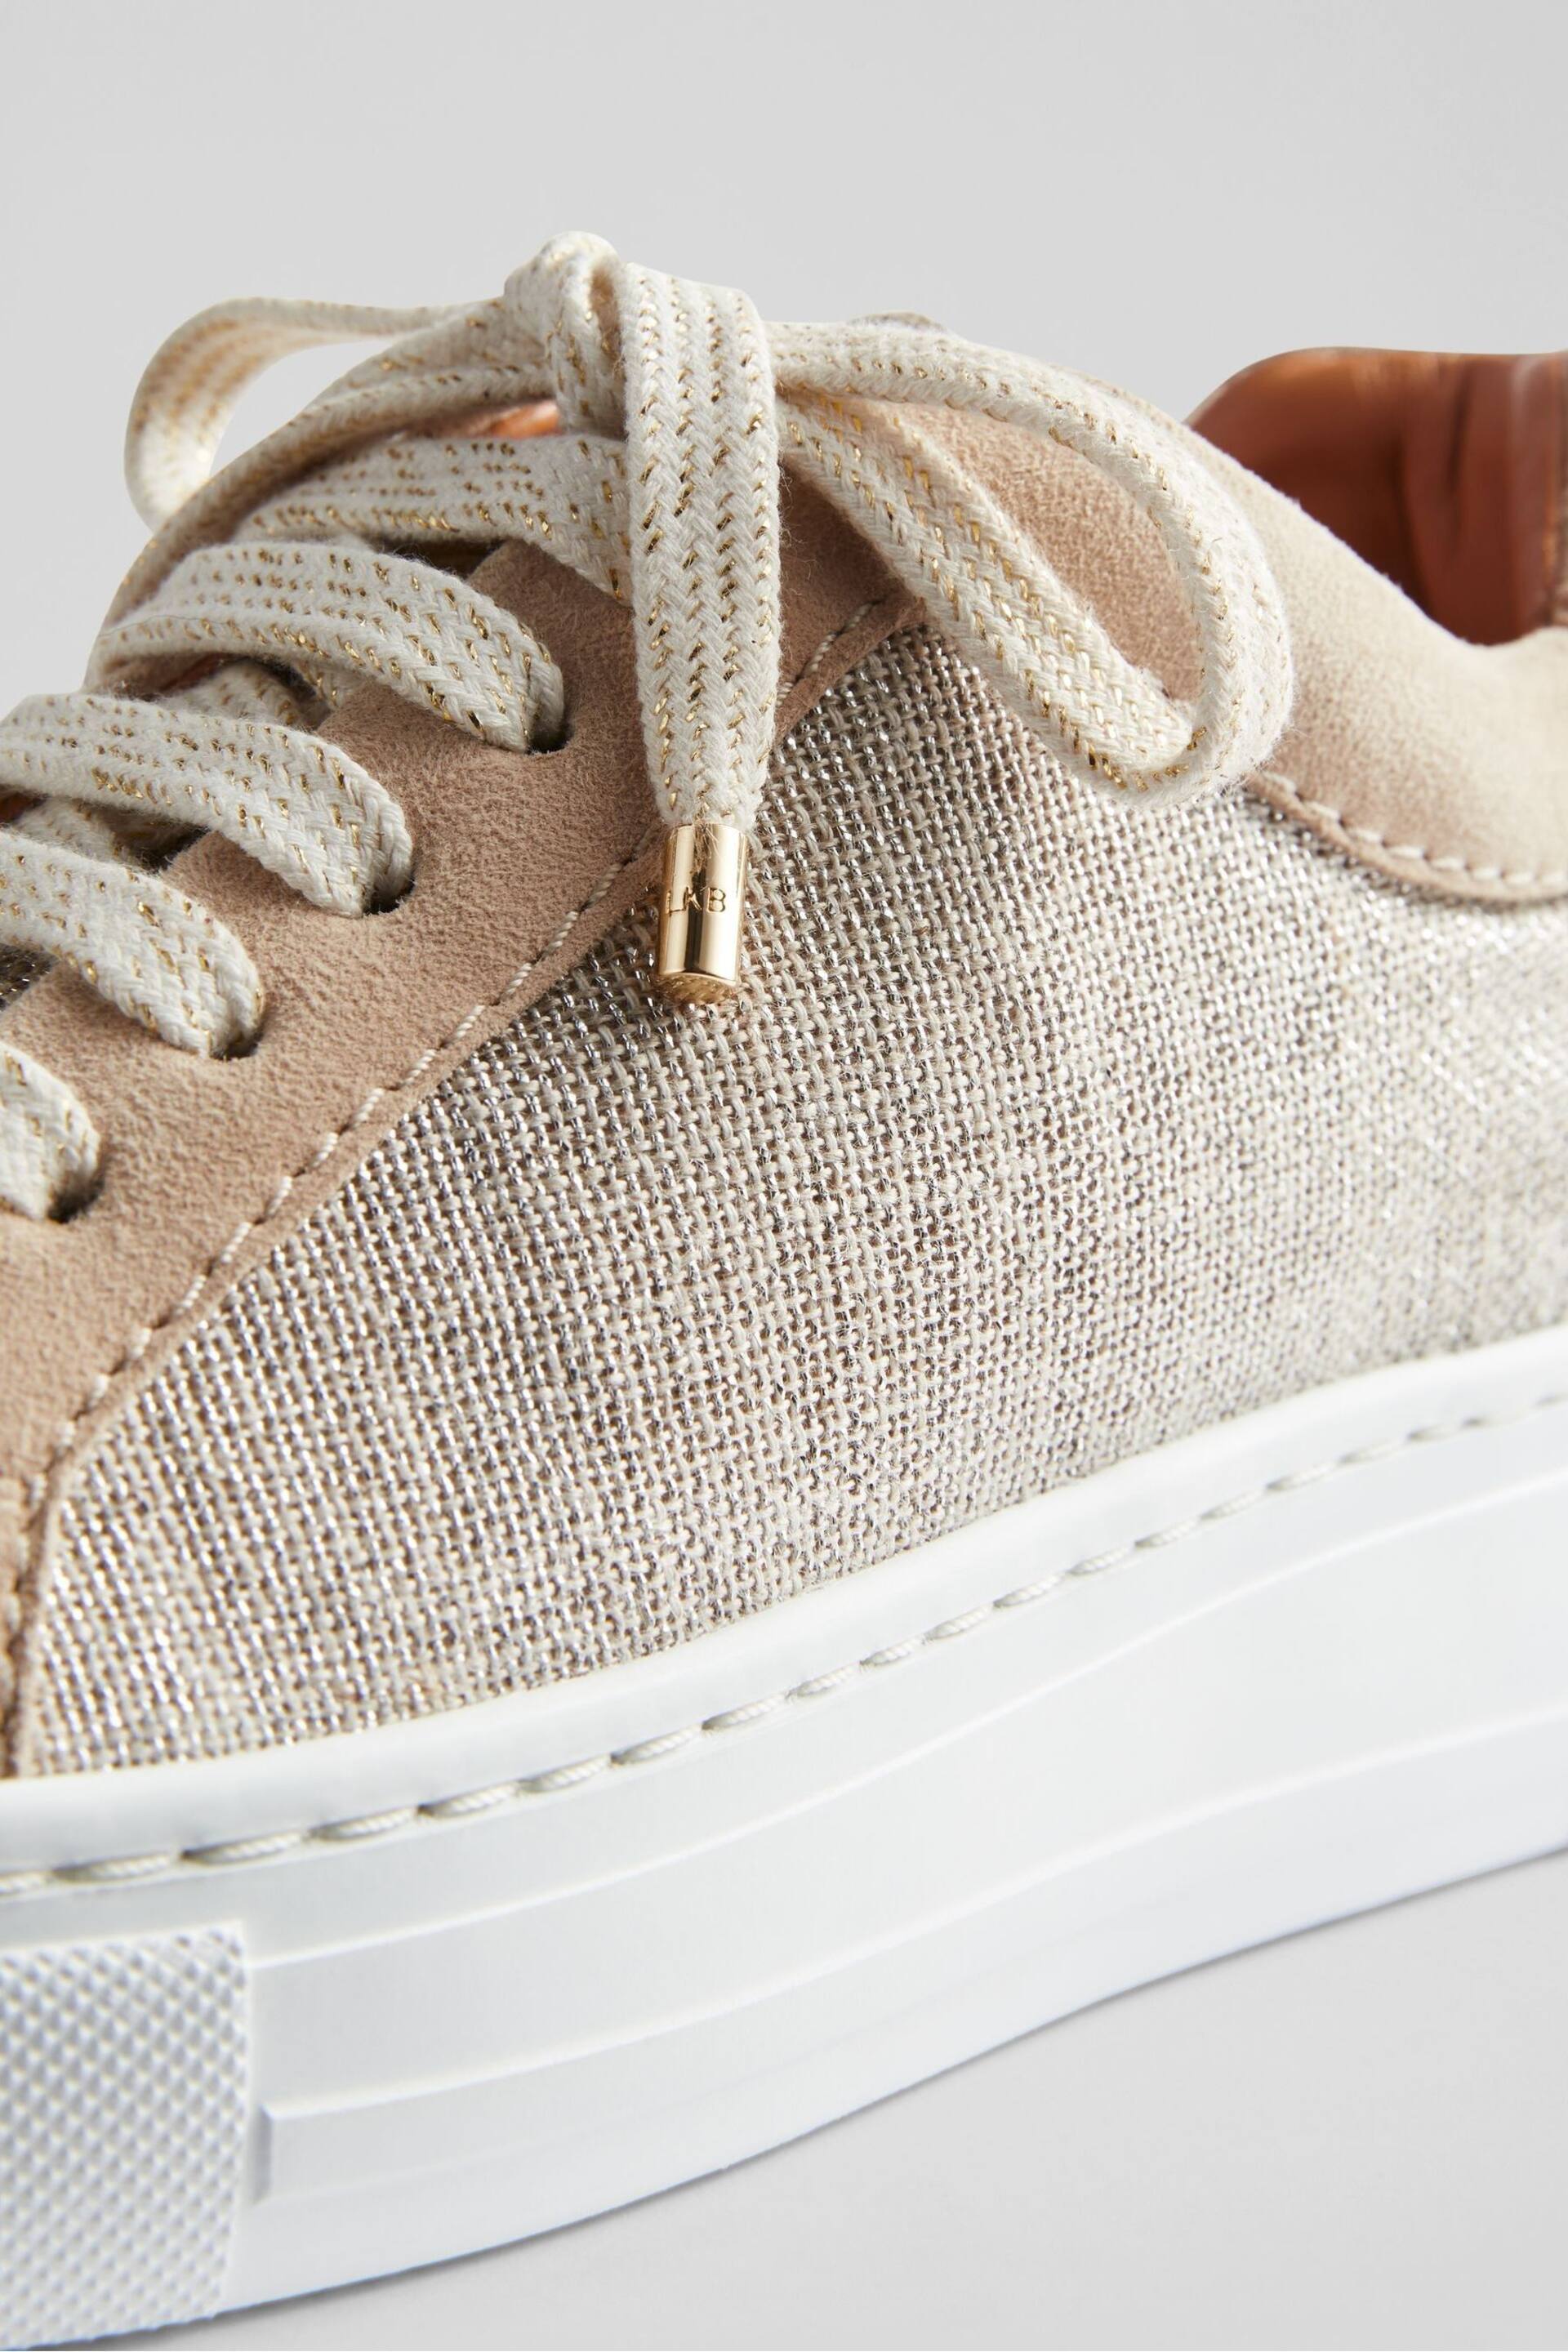 LK Bennett Fabric And Beige Suede Flatform Trainers - Image 4 of 4